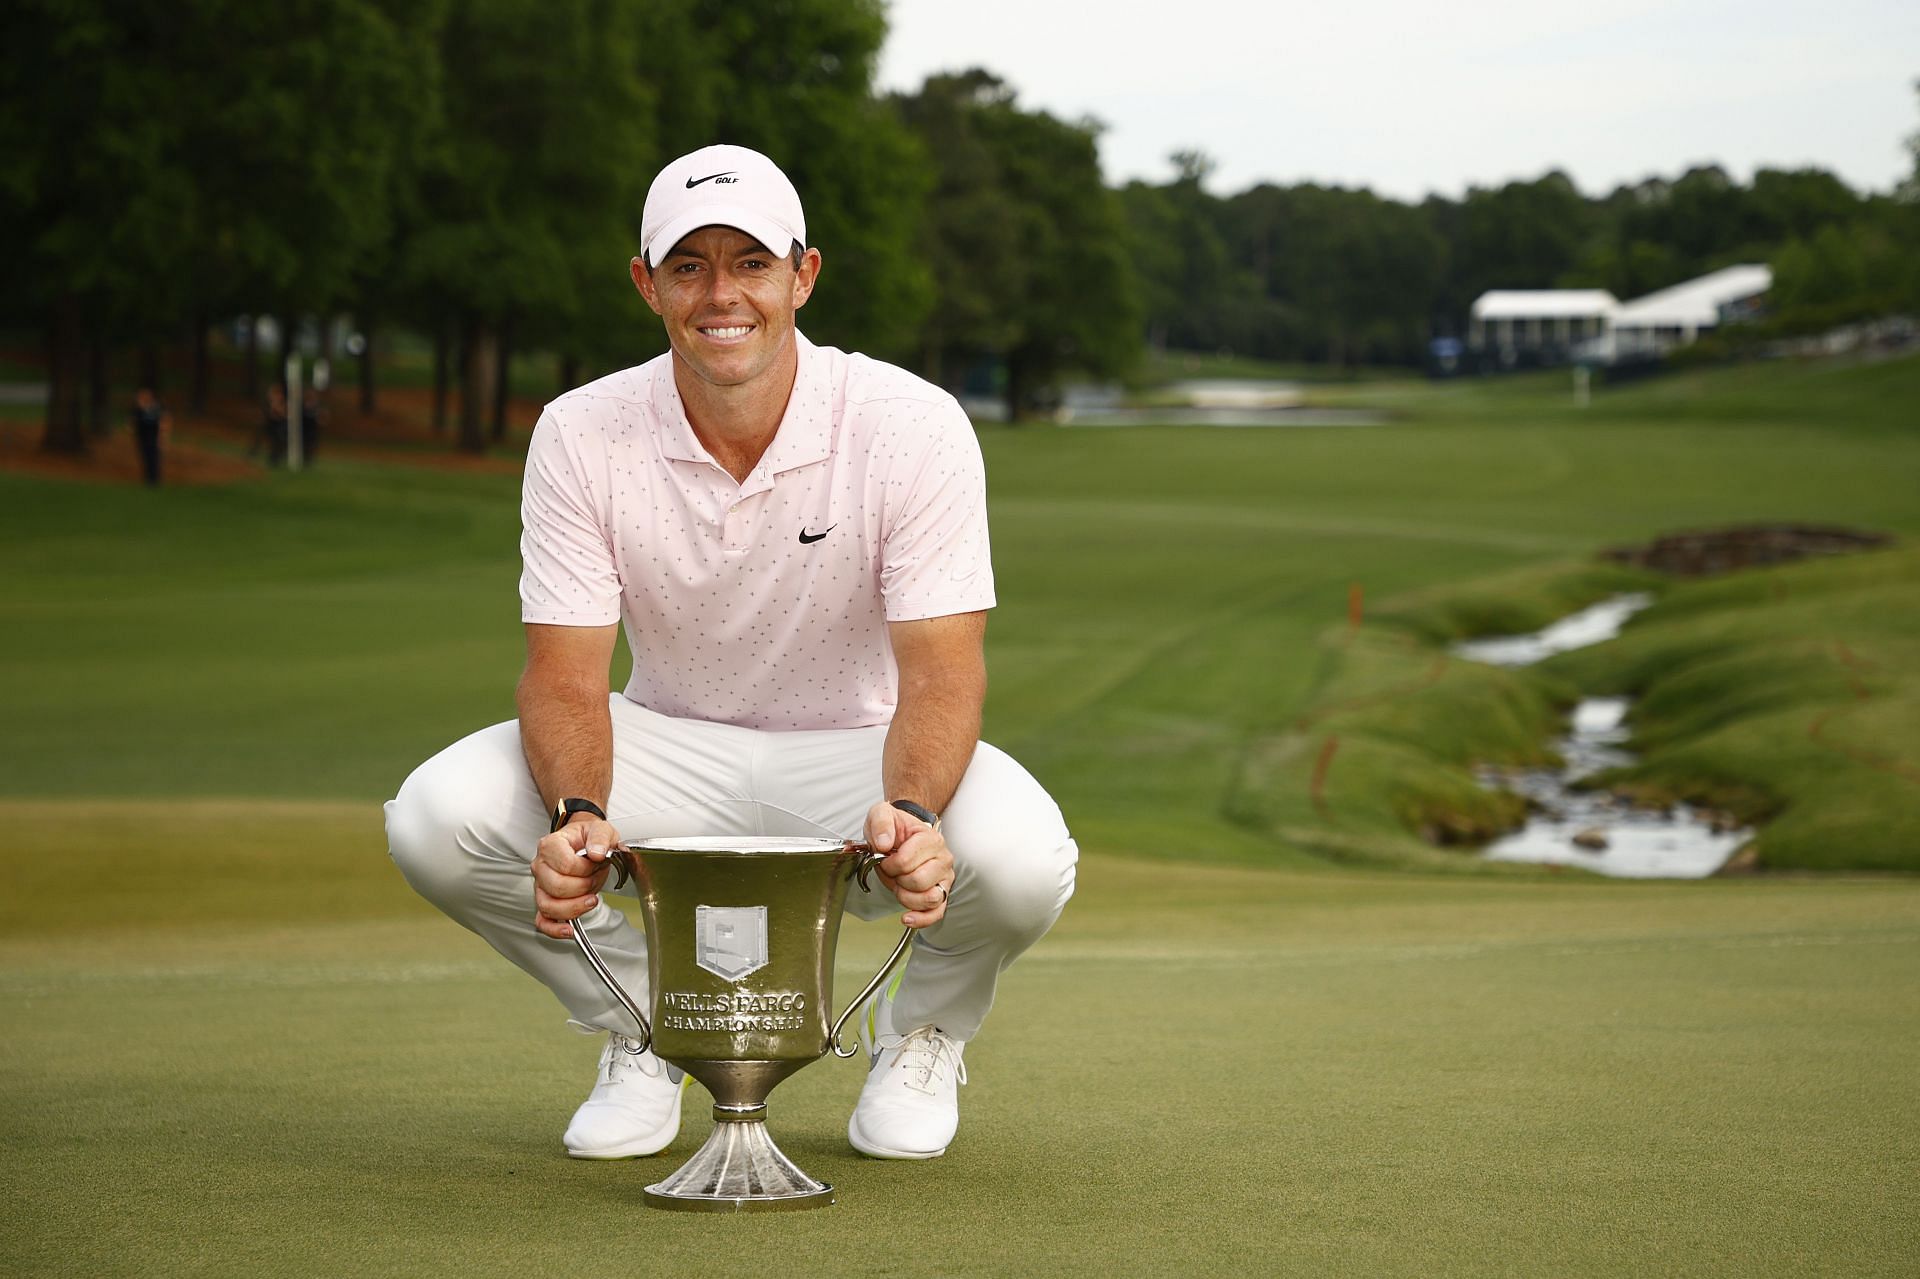 Rory McIlory will be back in action this week at Wells Fargo Championship